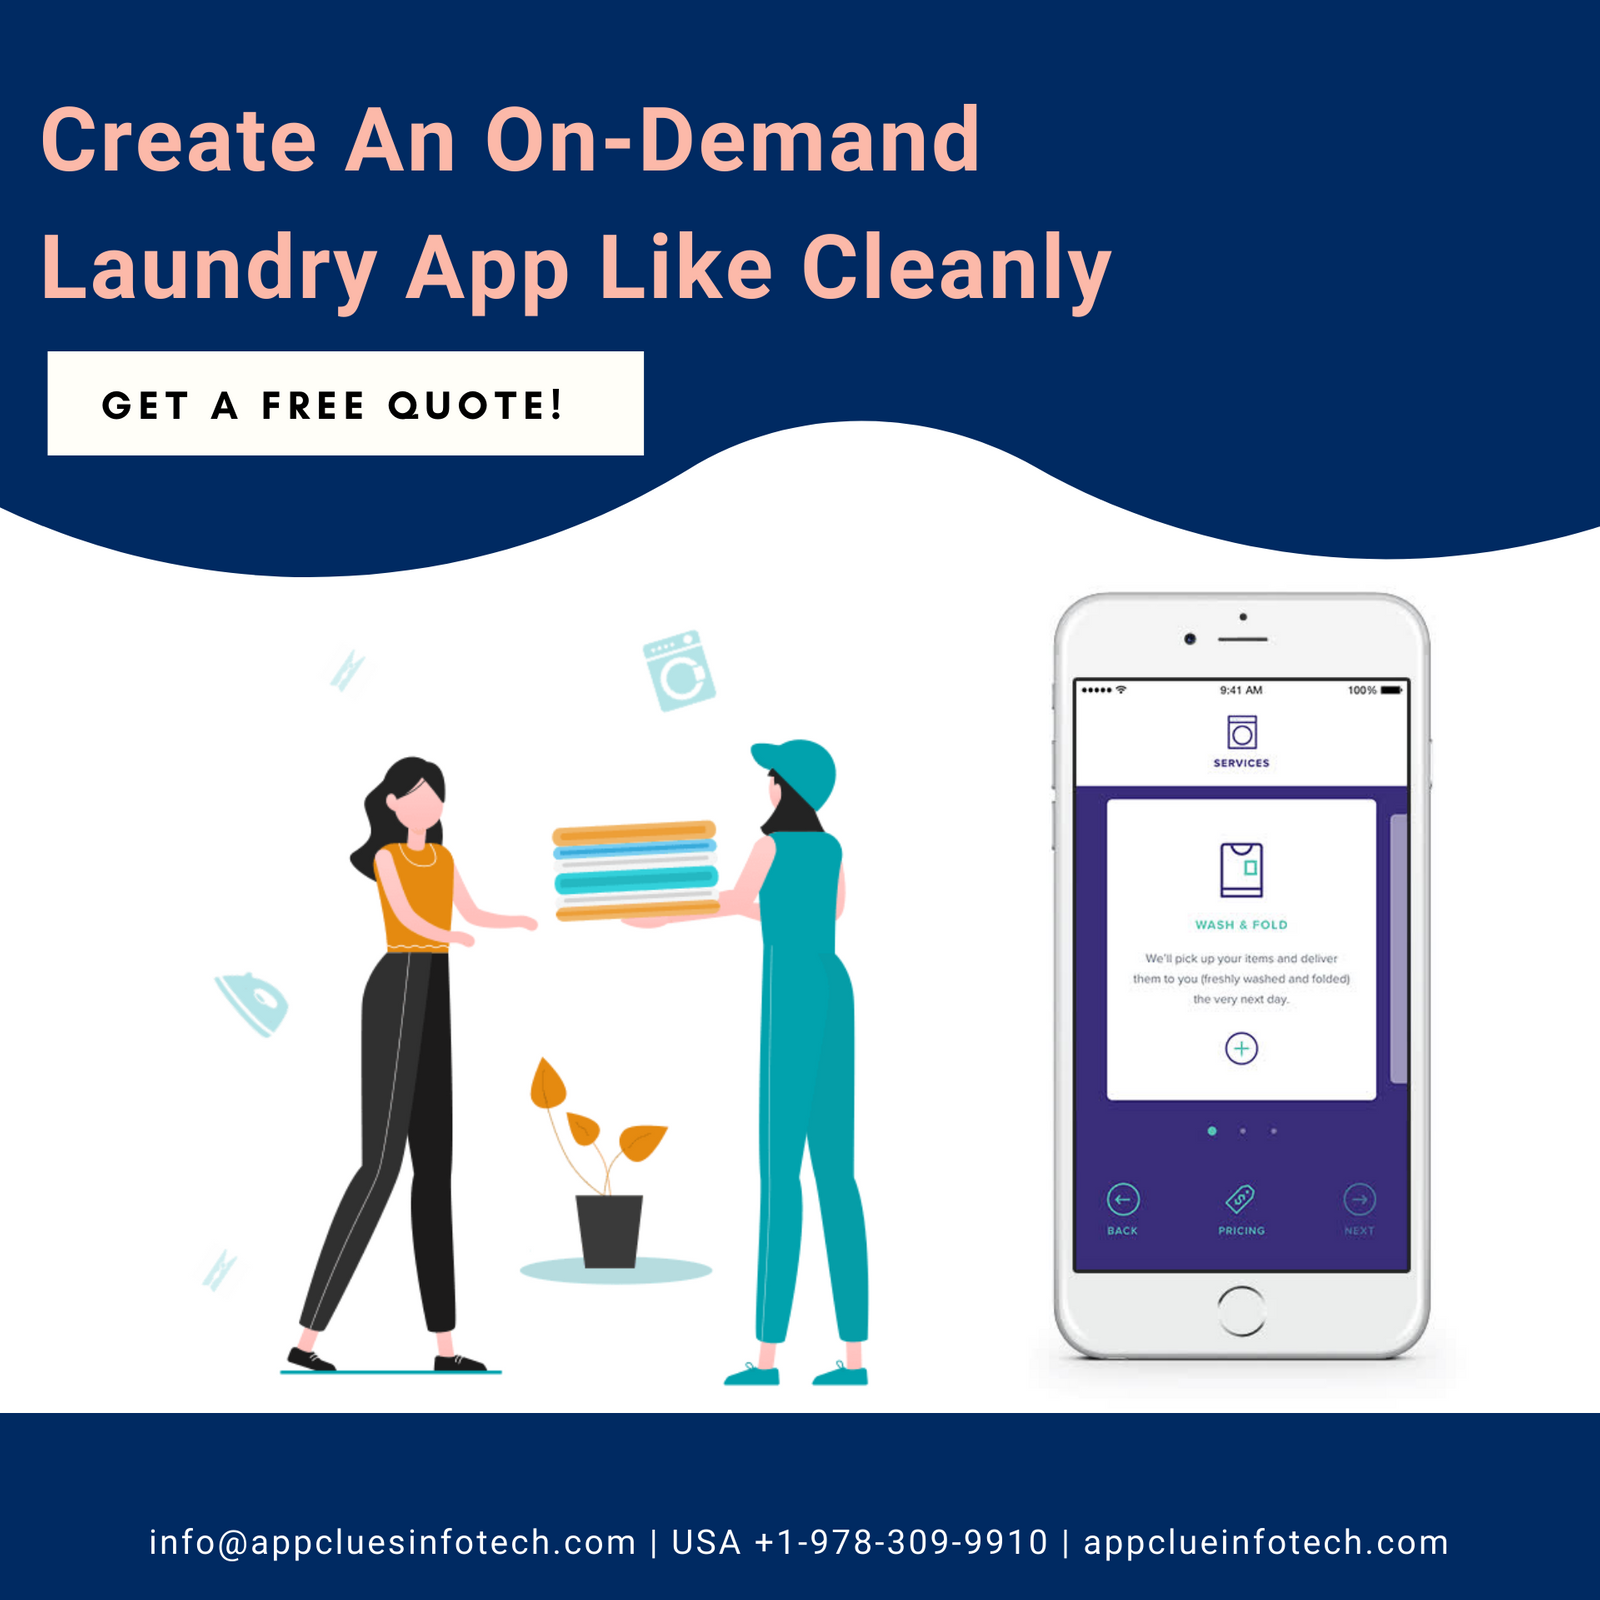 Create a Laundry App Like Cleanly